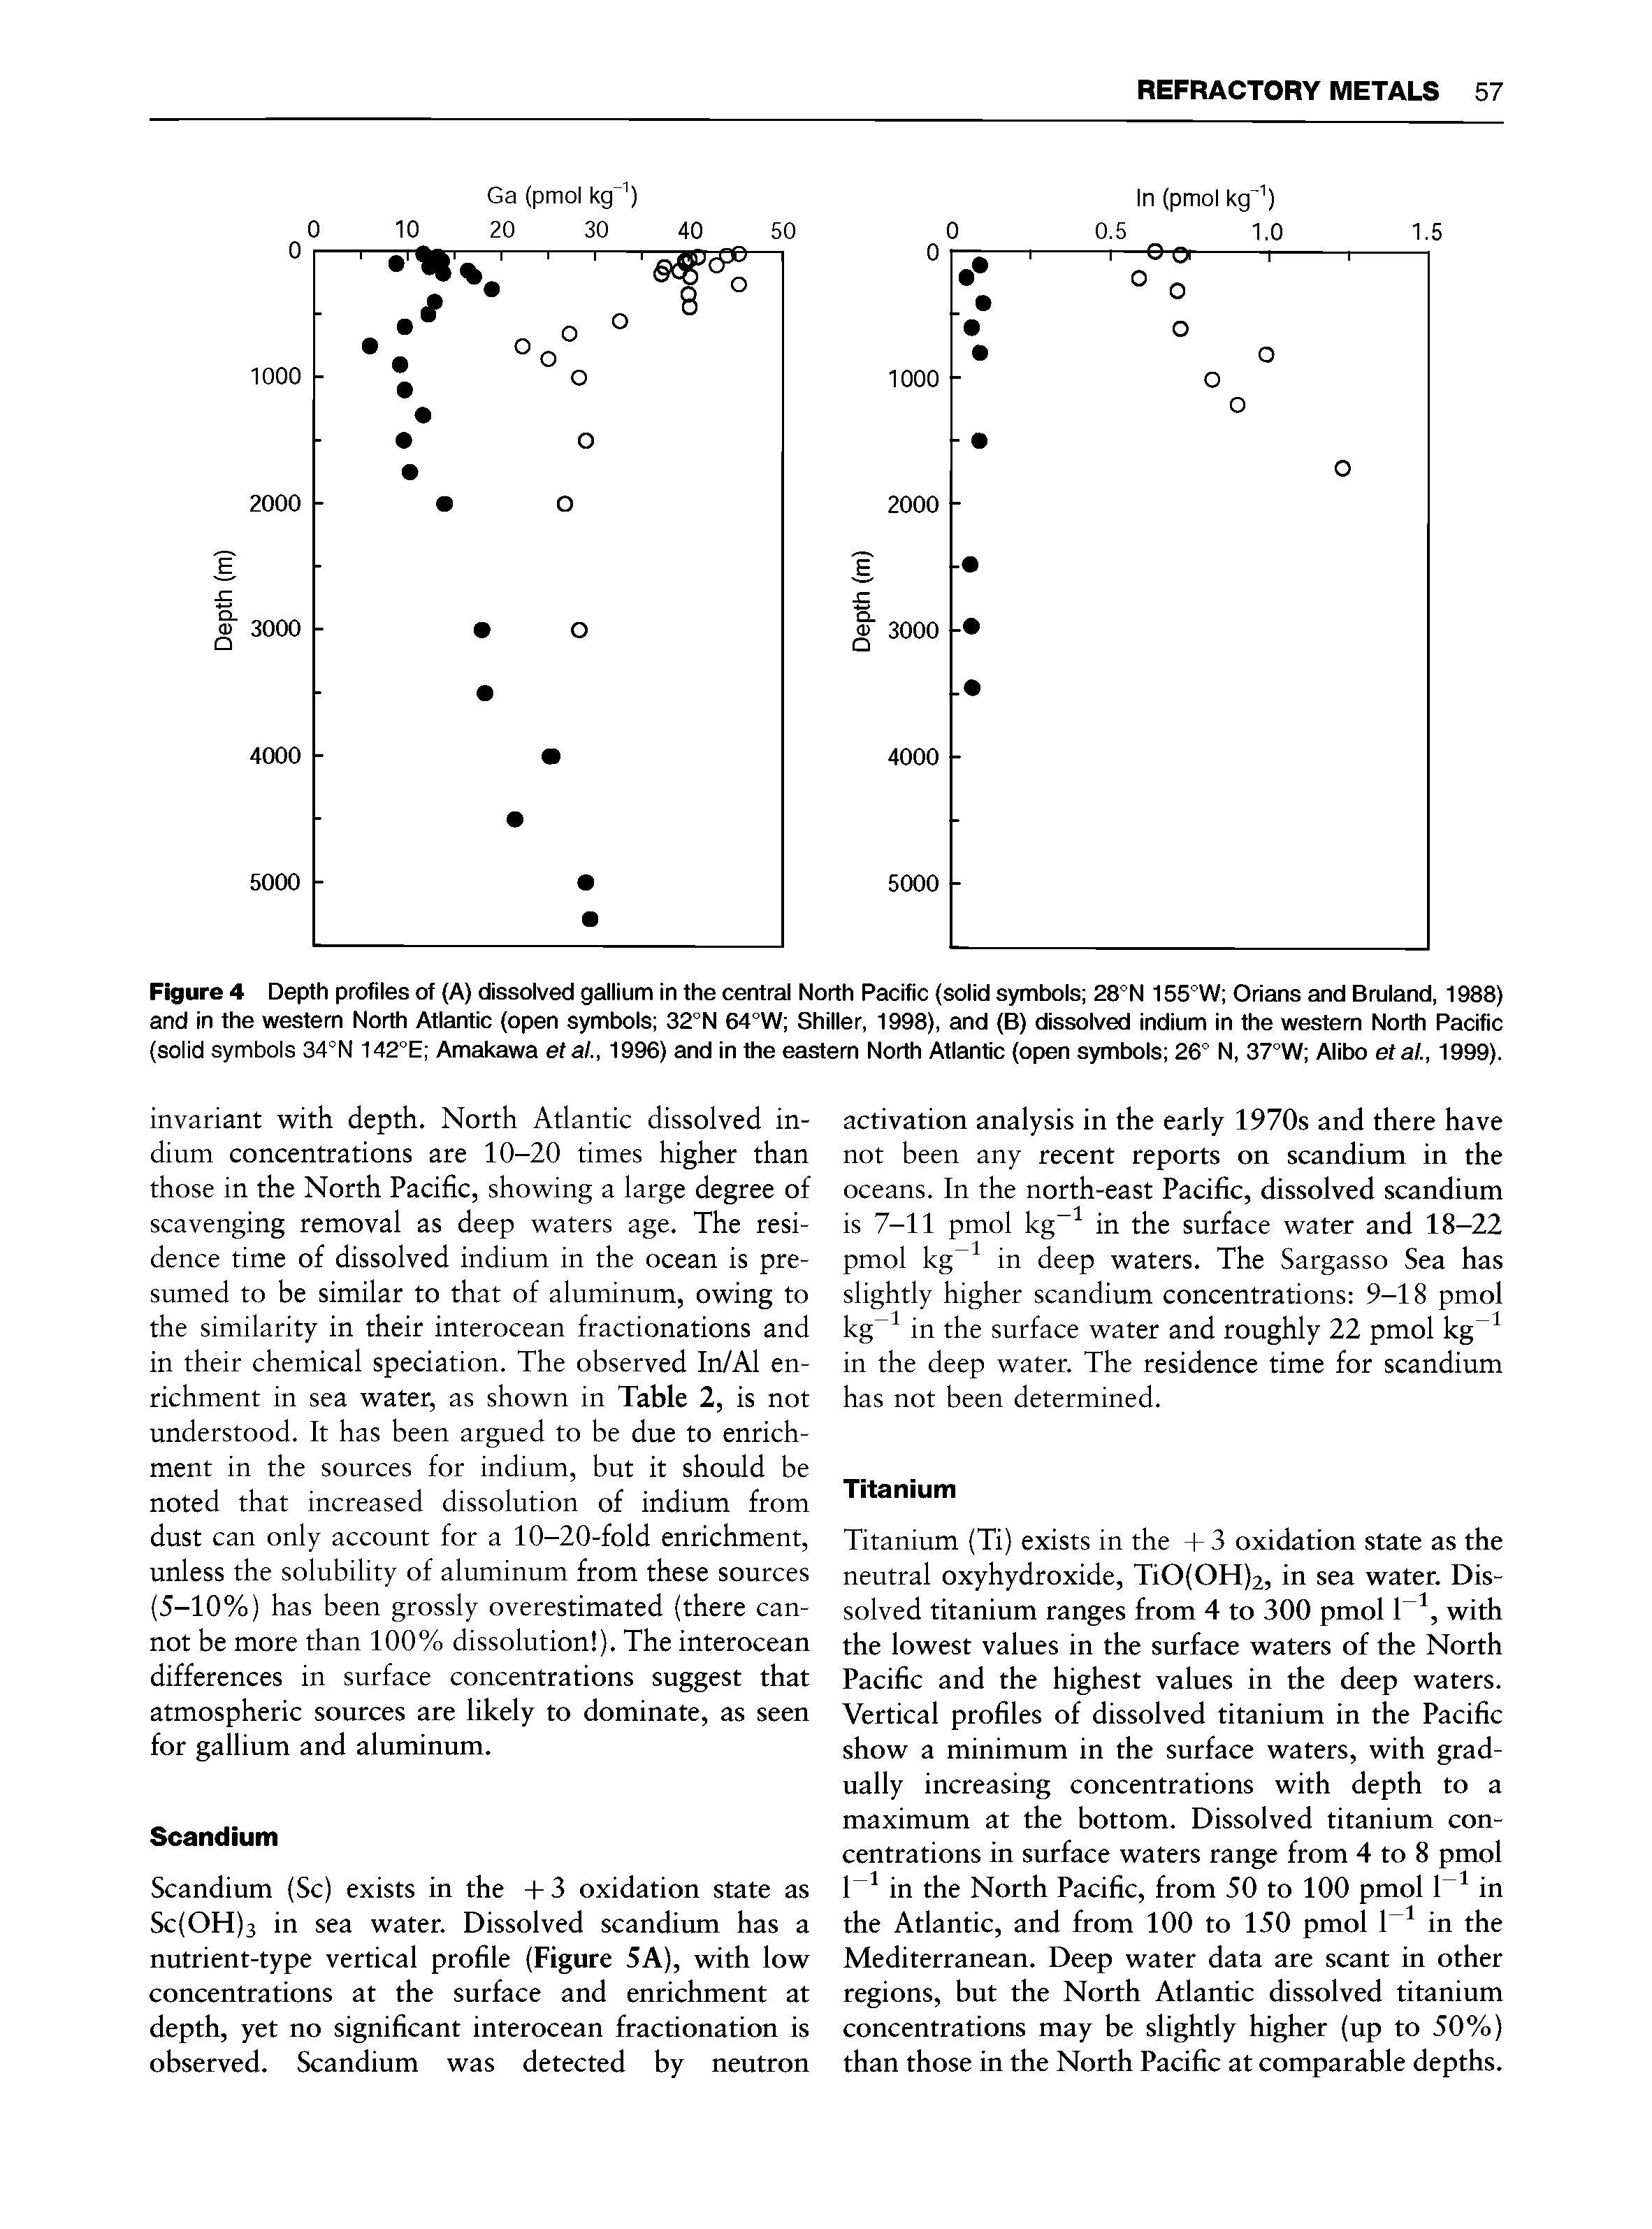 Figure 4 Depth profiles of (A) dissolved gallium in the central North Pacific (solid symbols 28°N 155°W Orians and Bruland, 1988) and in the western North Atlantic (open symbols 32°N 64°W Shiller, 1998), and (B) dissolved indium in the western North Pacific (solid symbols 34°N 142°E Amakawa eta ., 1996) and in the eastern North Atlantic (open symbols 26° N, 37°W Alibo etat., 1999).